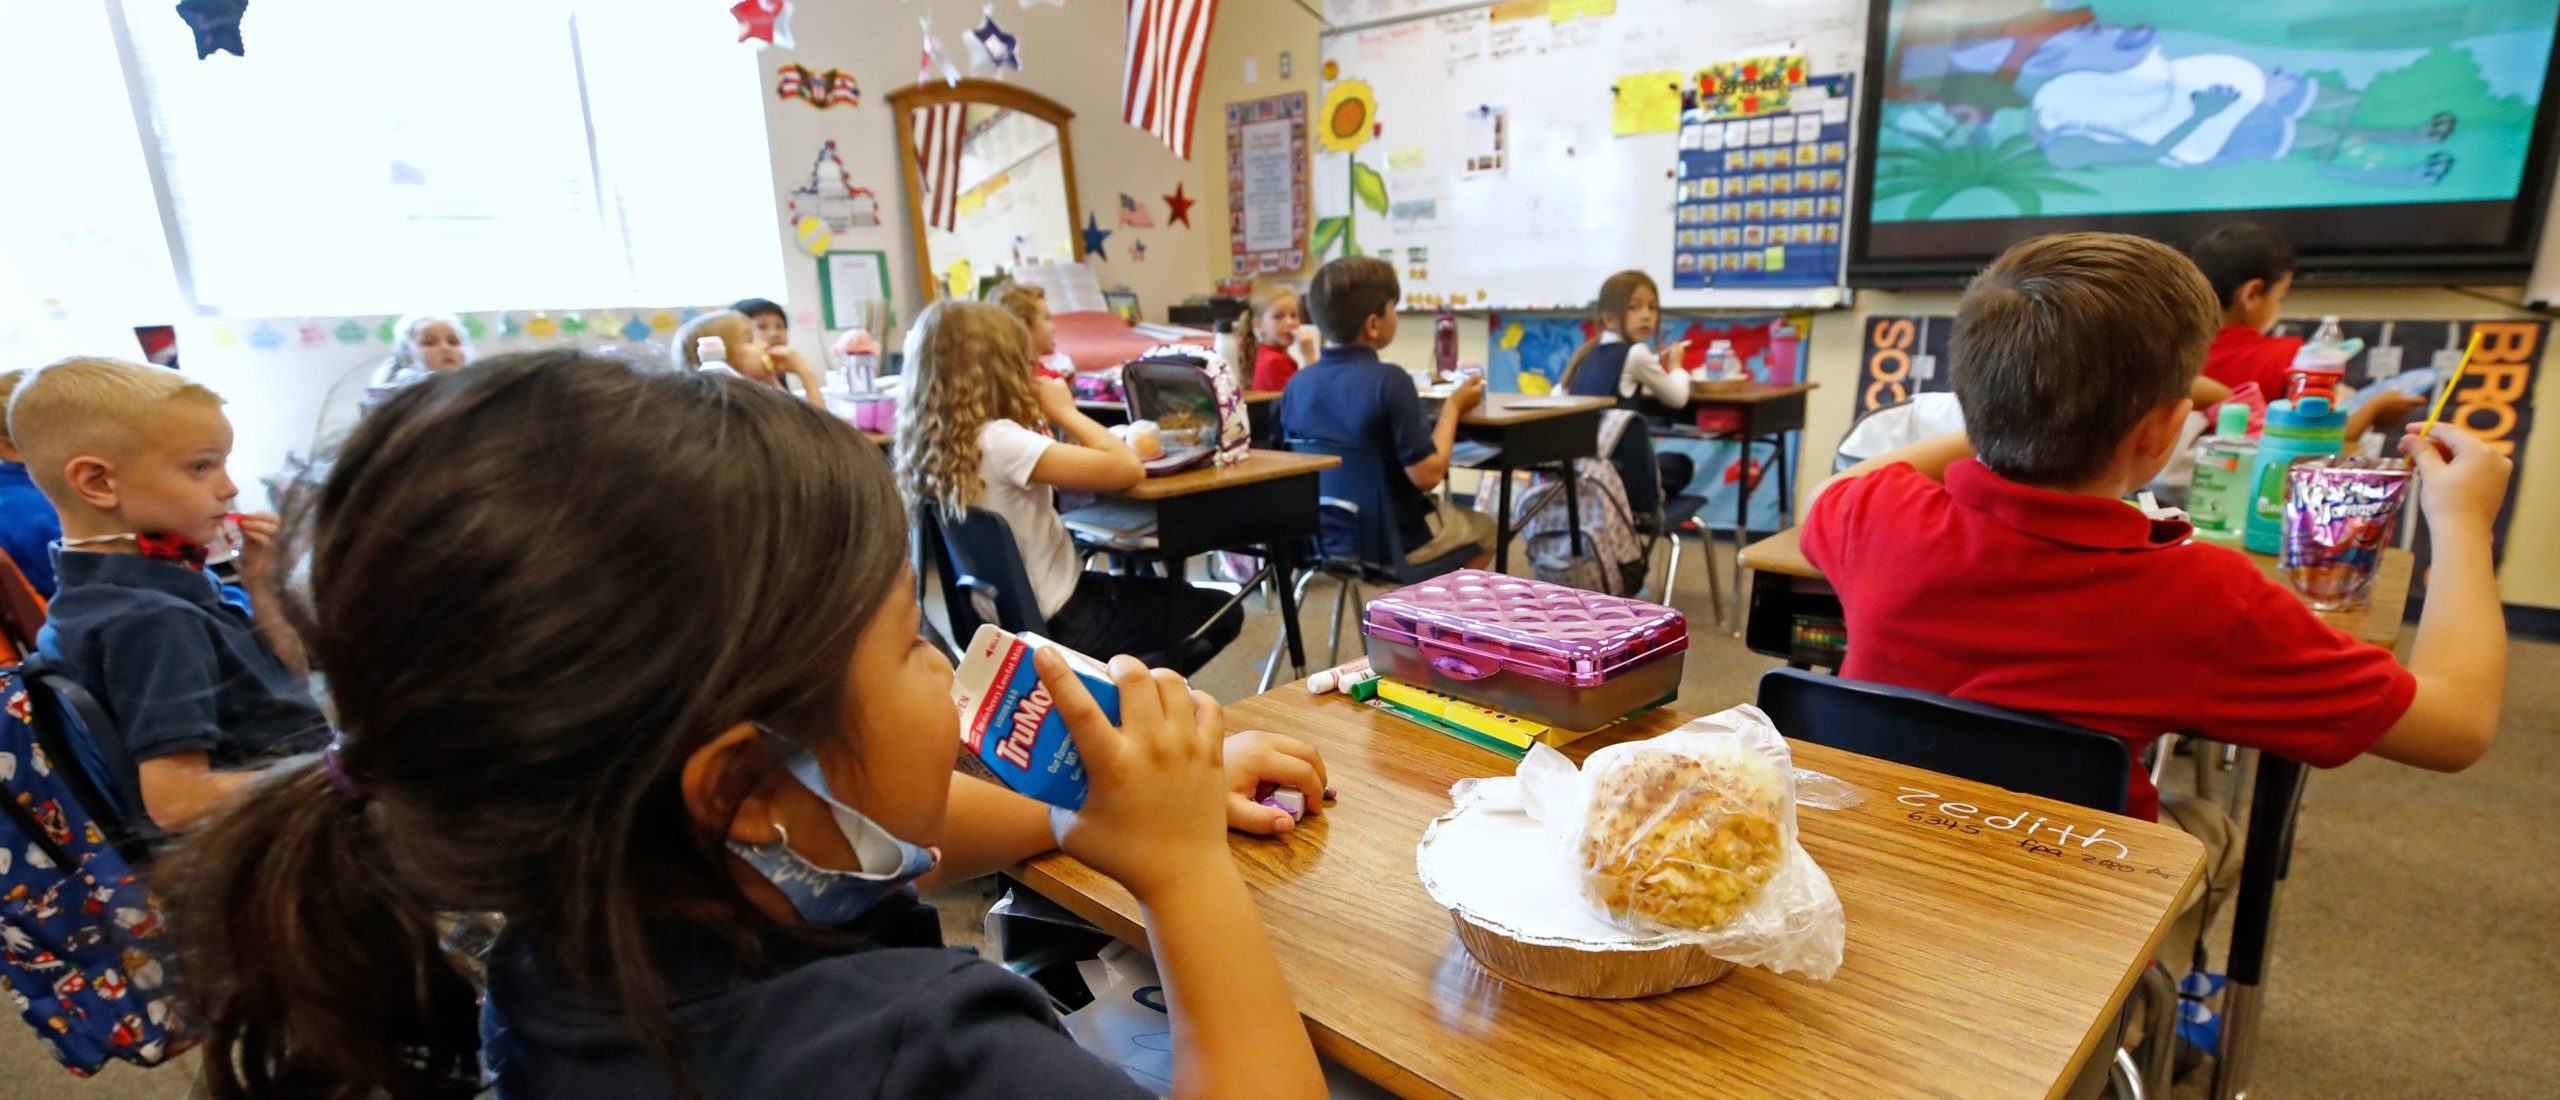 A student eats lunch in her classroom at Freedom Preparatory Academy on September 10, 2020 in Provo, Utah. - In person schooling with masks has started up in many Utah schools since shutting down in March of this year due to the covid-19 virus. (Photo by GEORGE FREY / AFP) (Photo by GEORGE FREY/AFP via Getty Images)